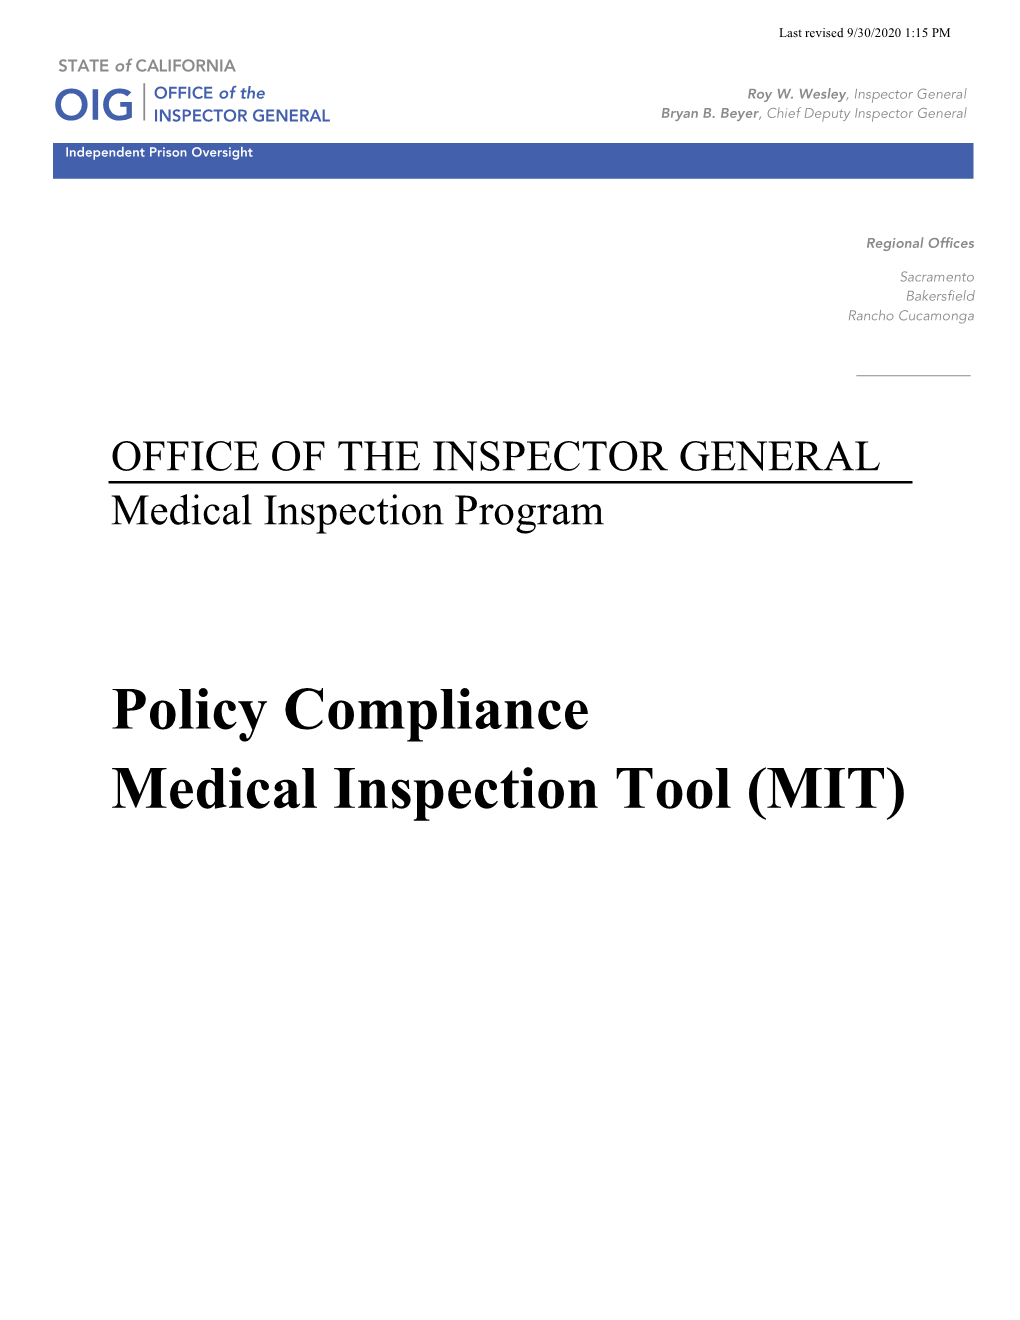 Medical Inspection Tool (MIT)